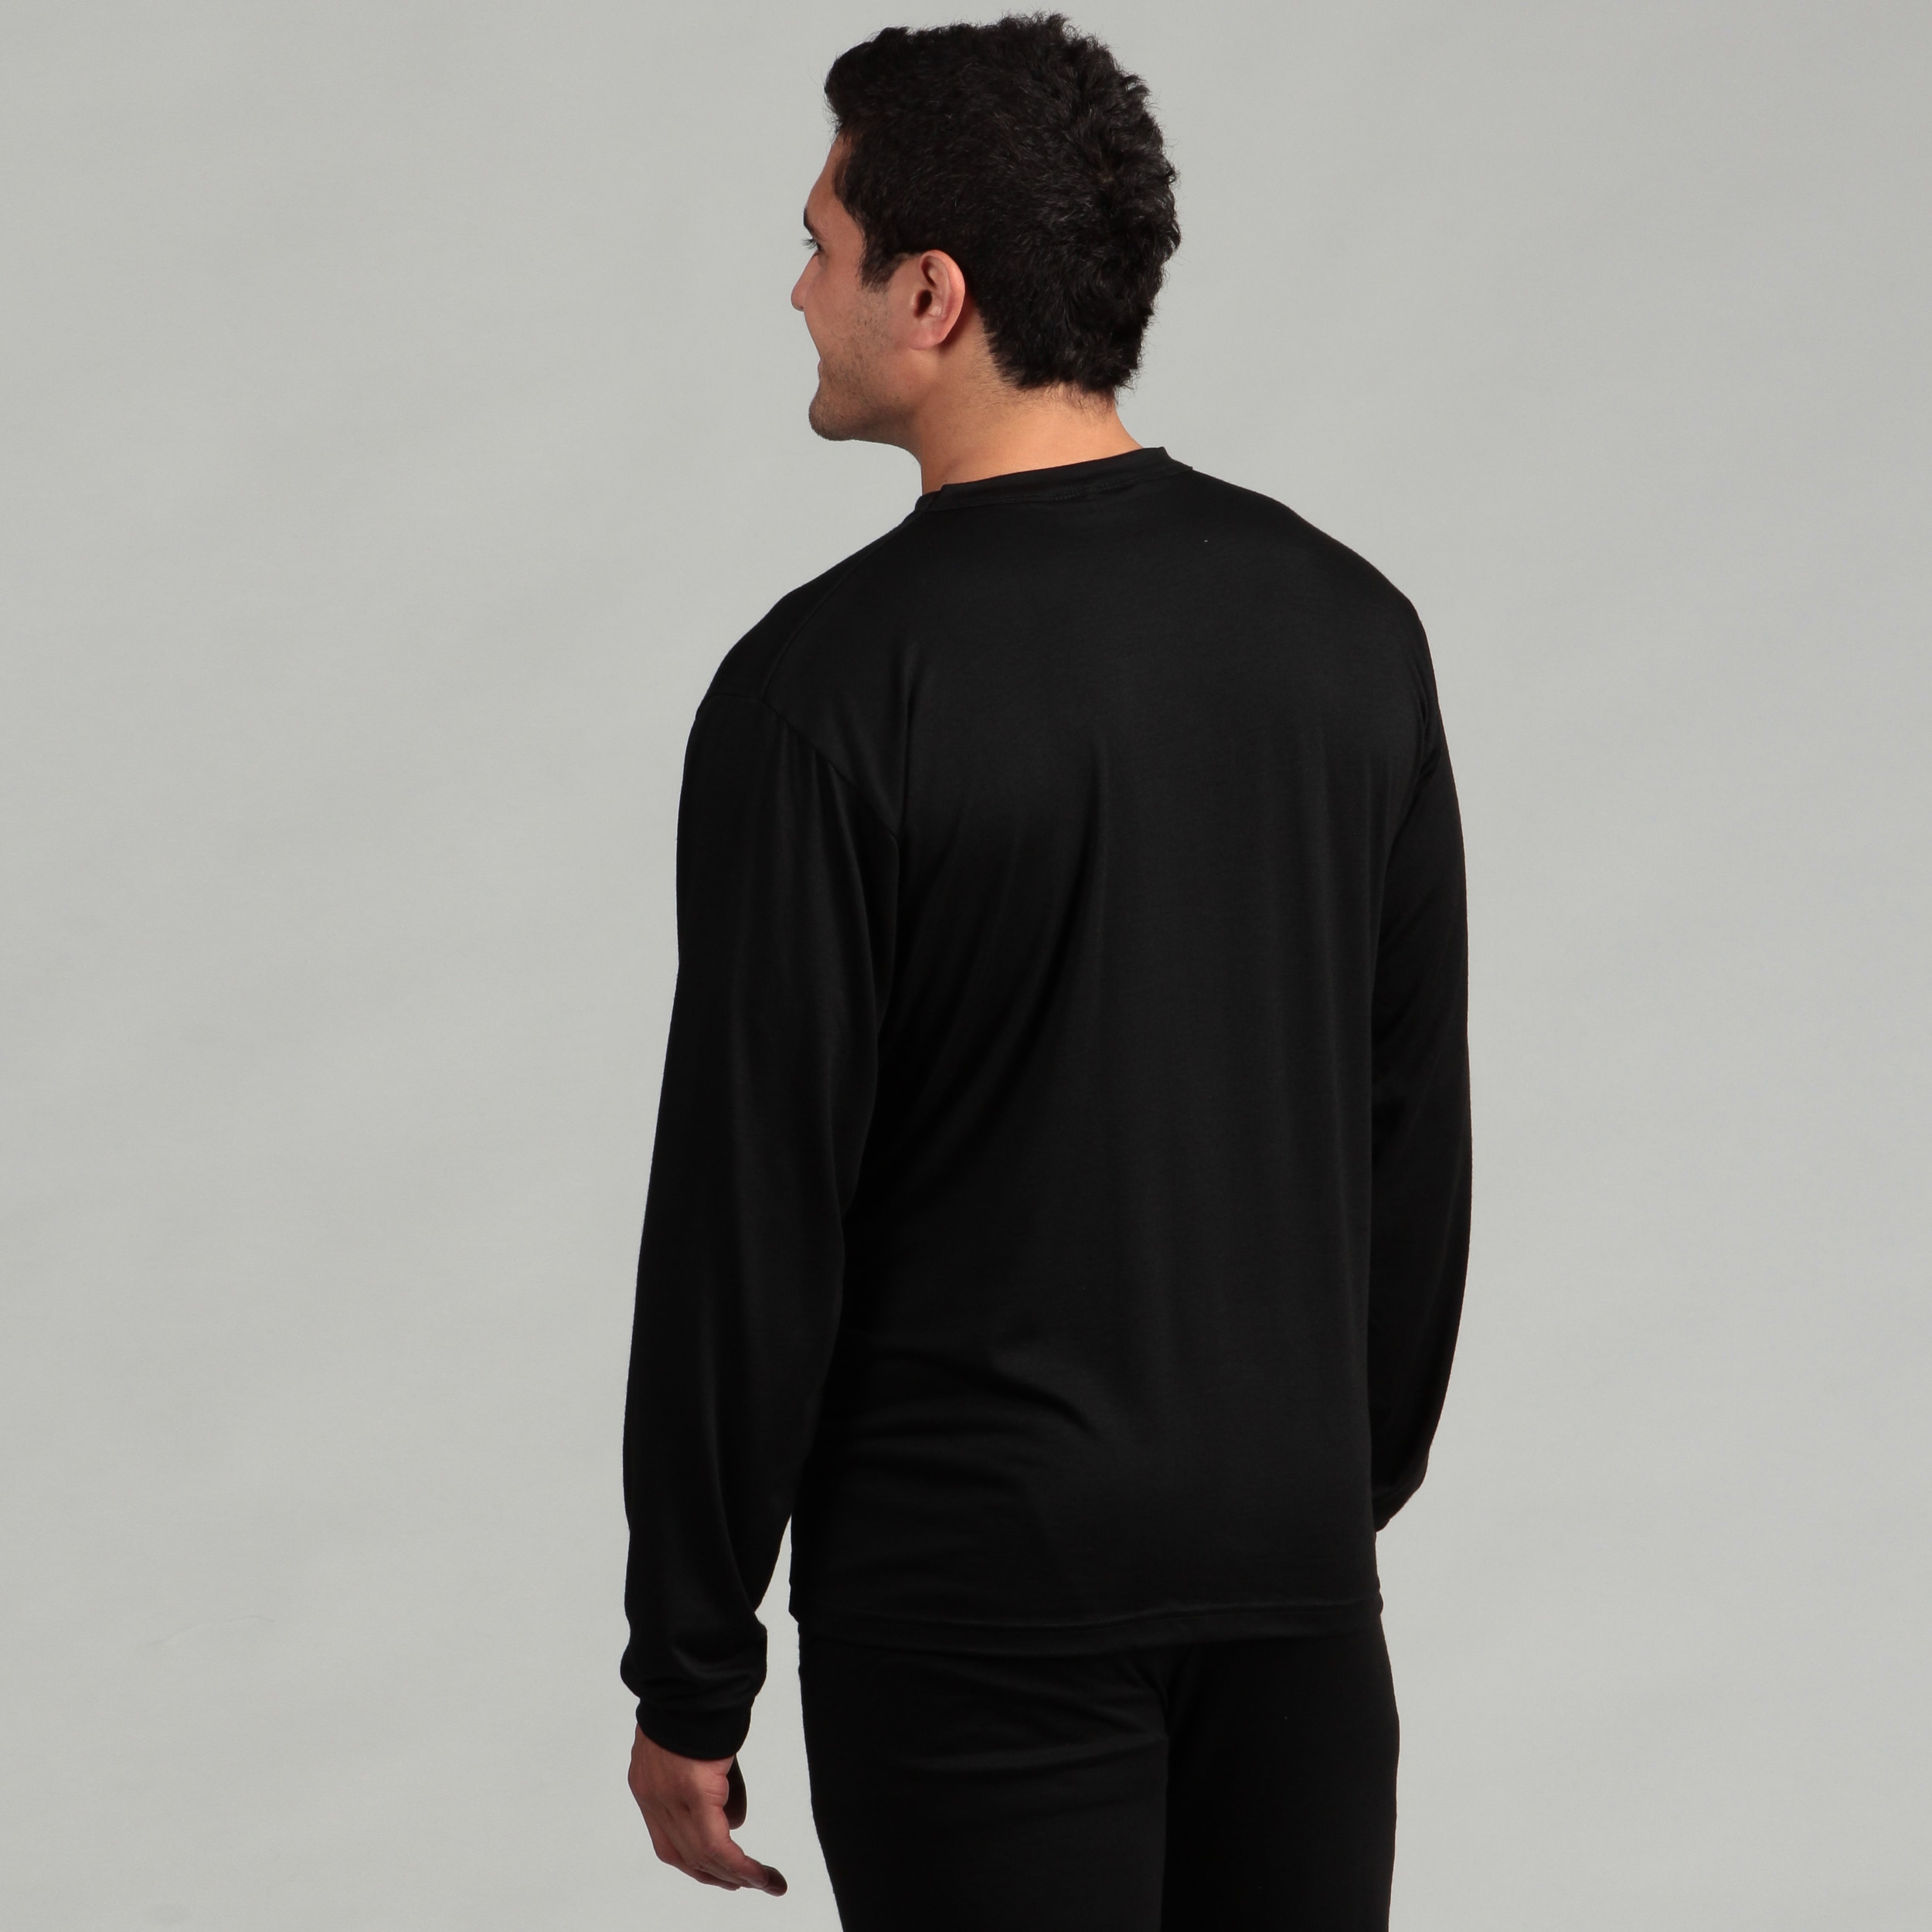 lightweight thermal clothing